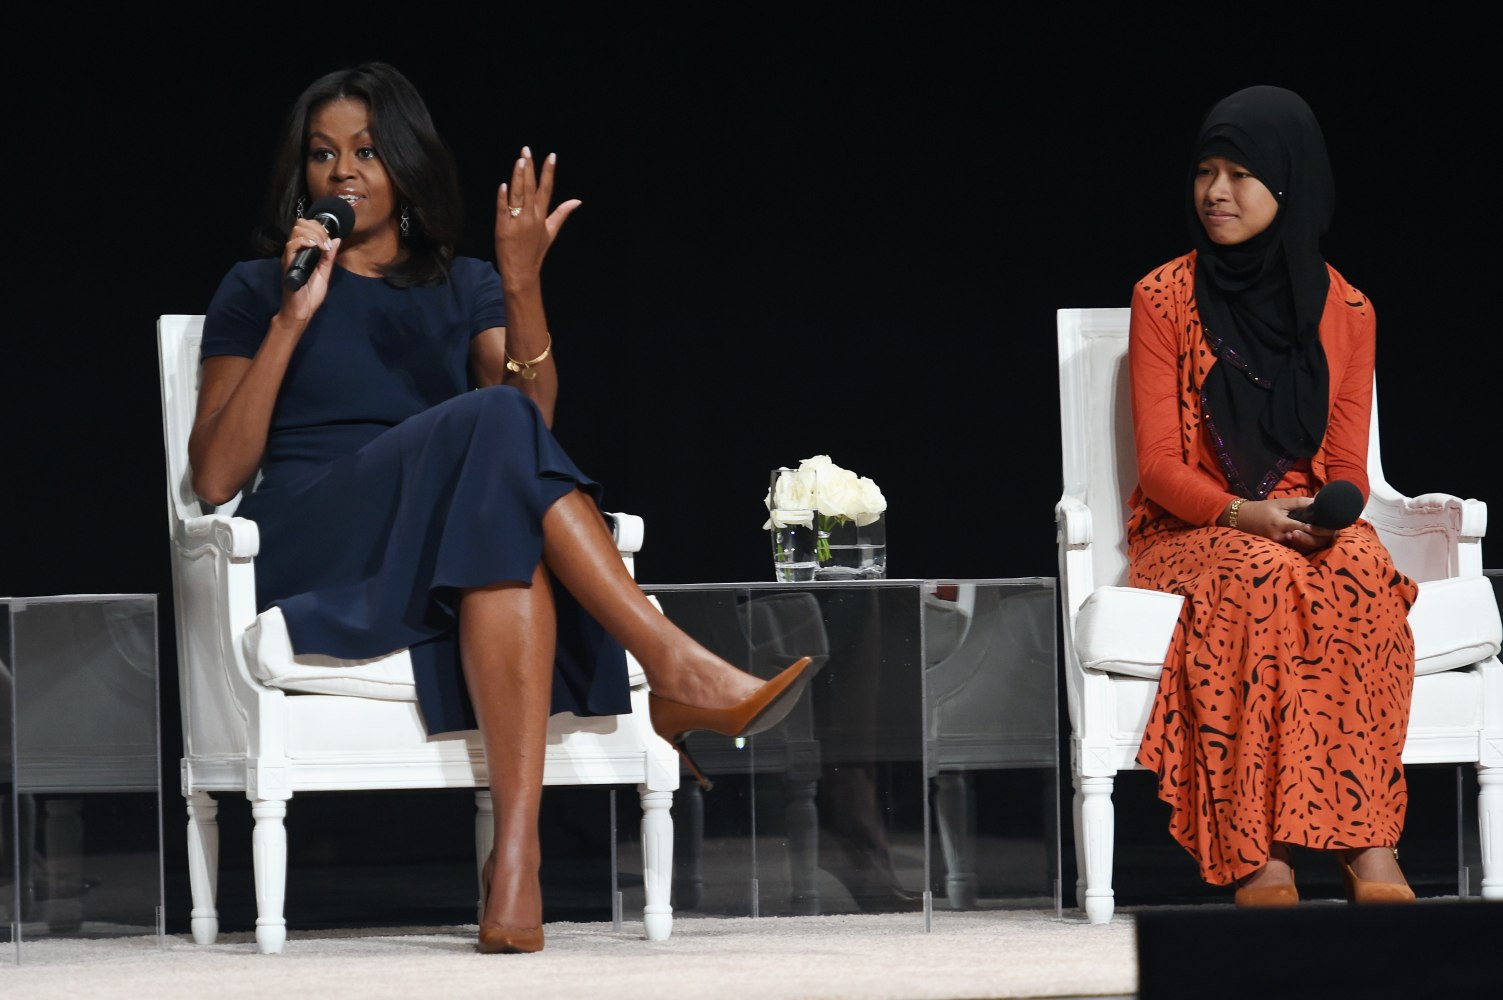 Michelle Obama Urges Girls: Don't Take Your Education for Granted - NBC News